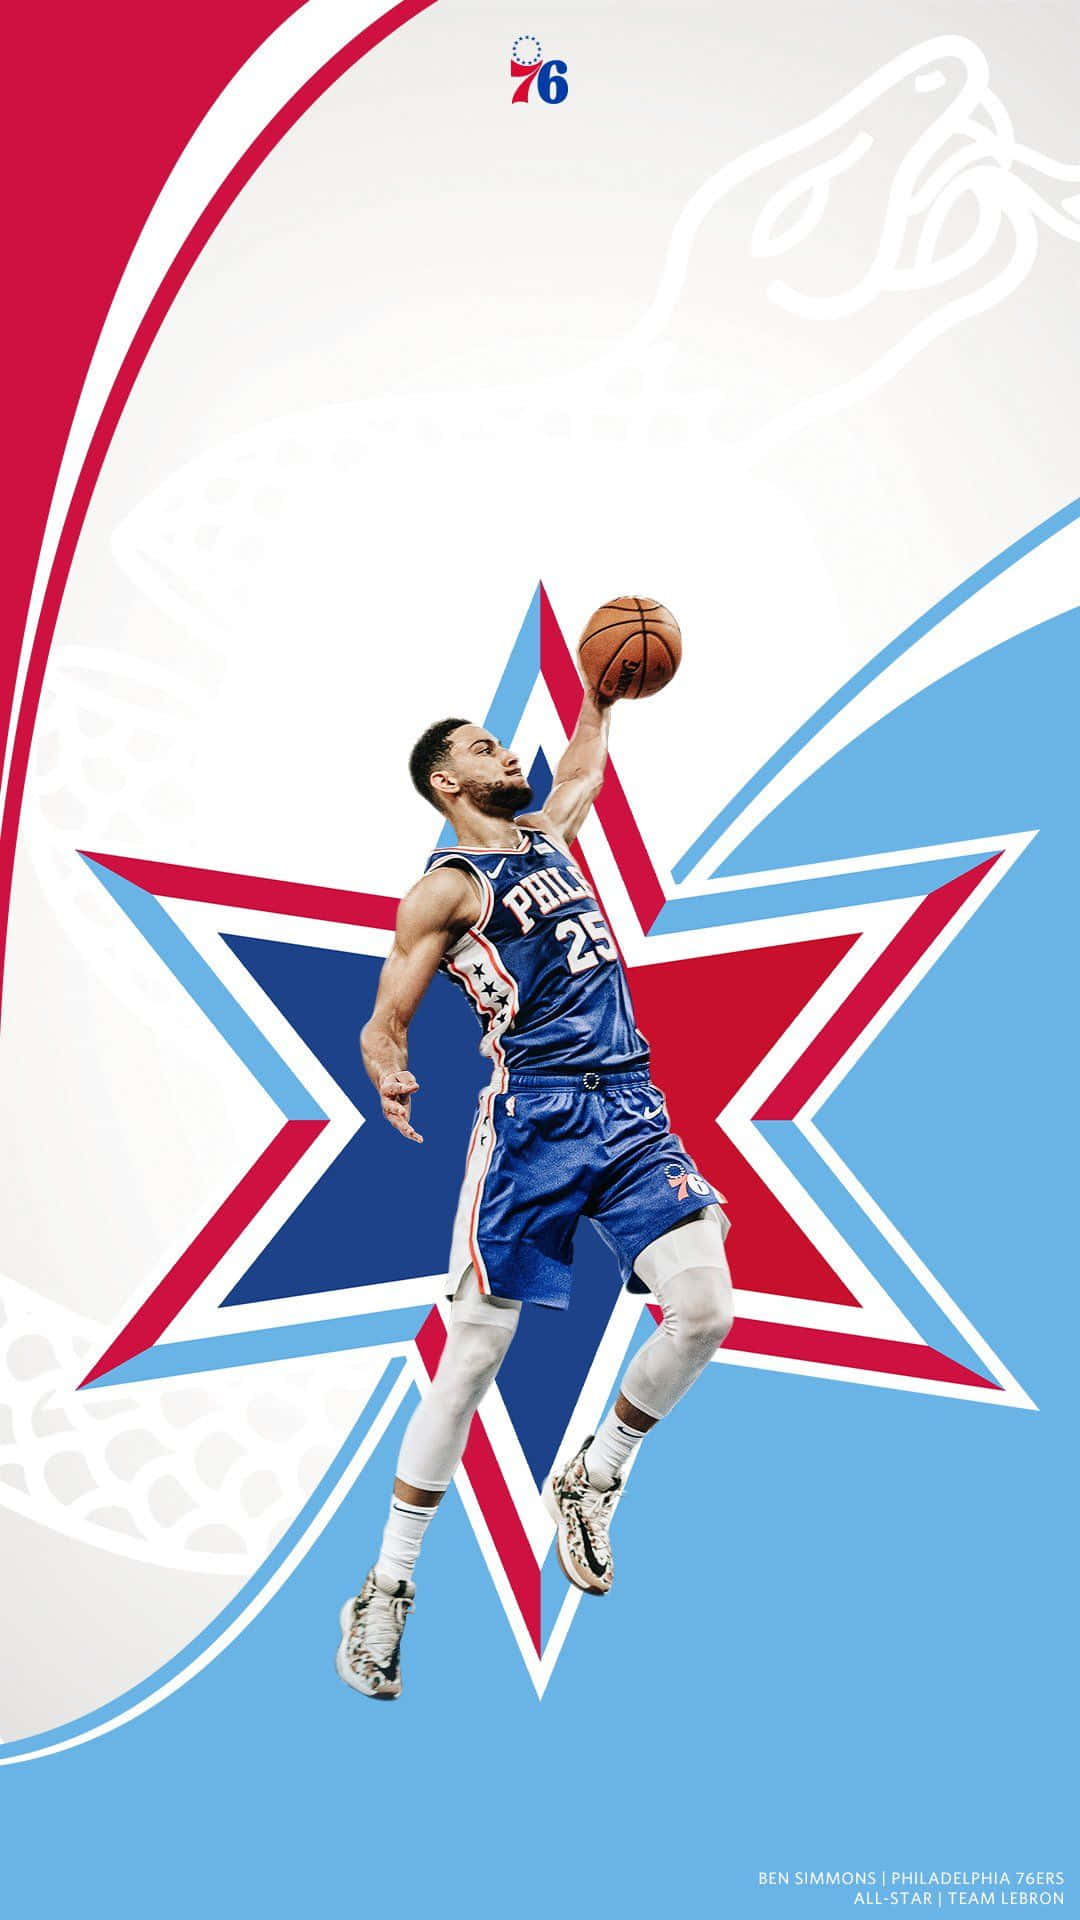 "Stay connected and show your love for the 76ers with this NBA Sixers iPhone!" Wallpaper